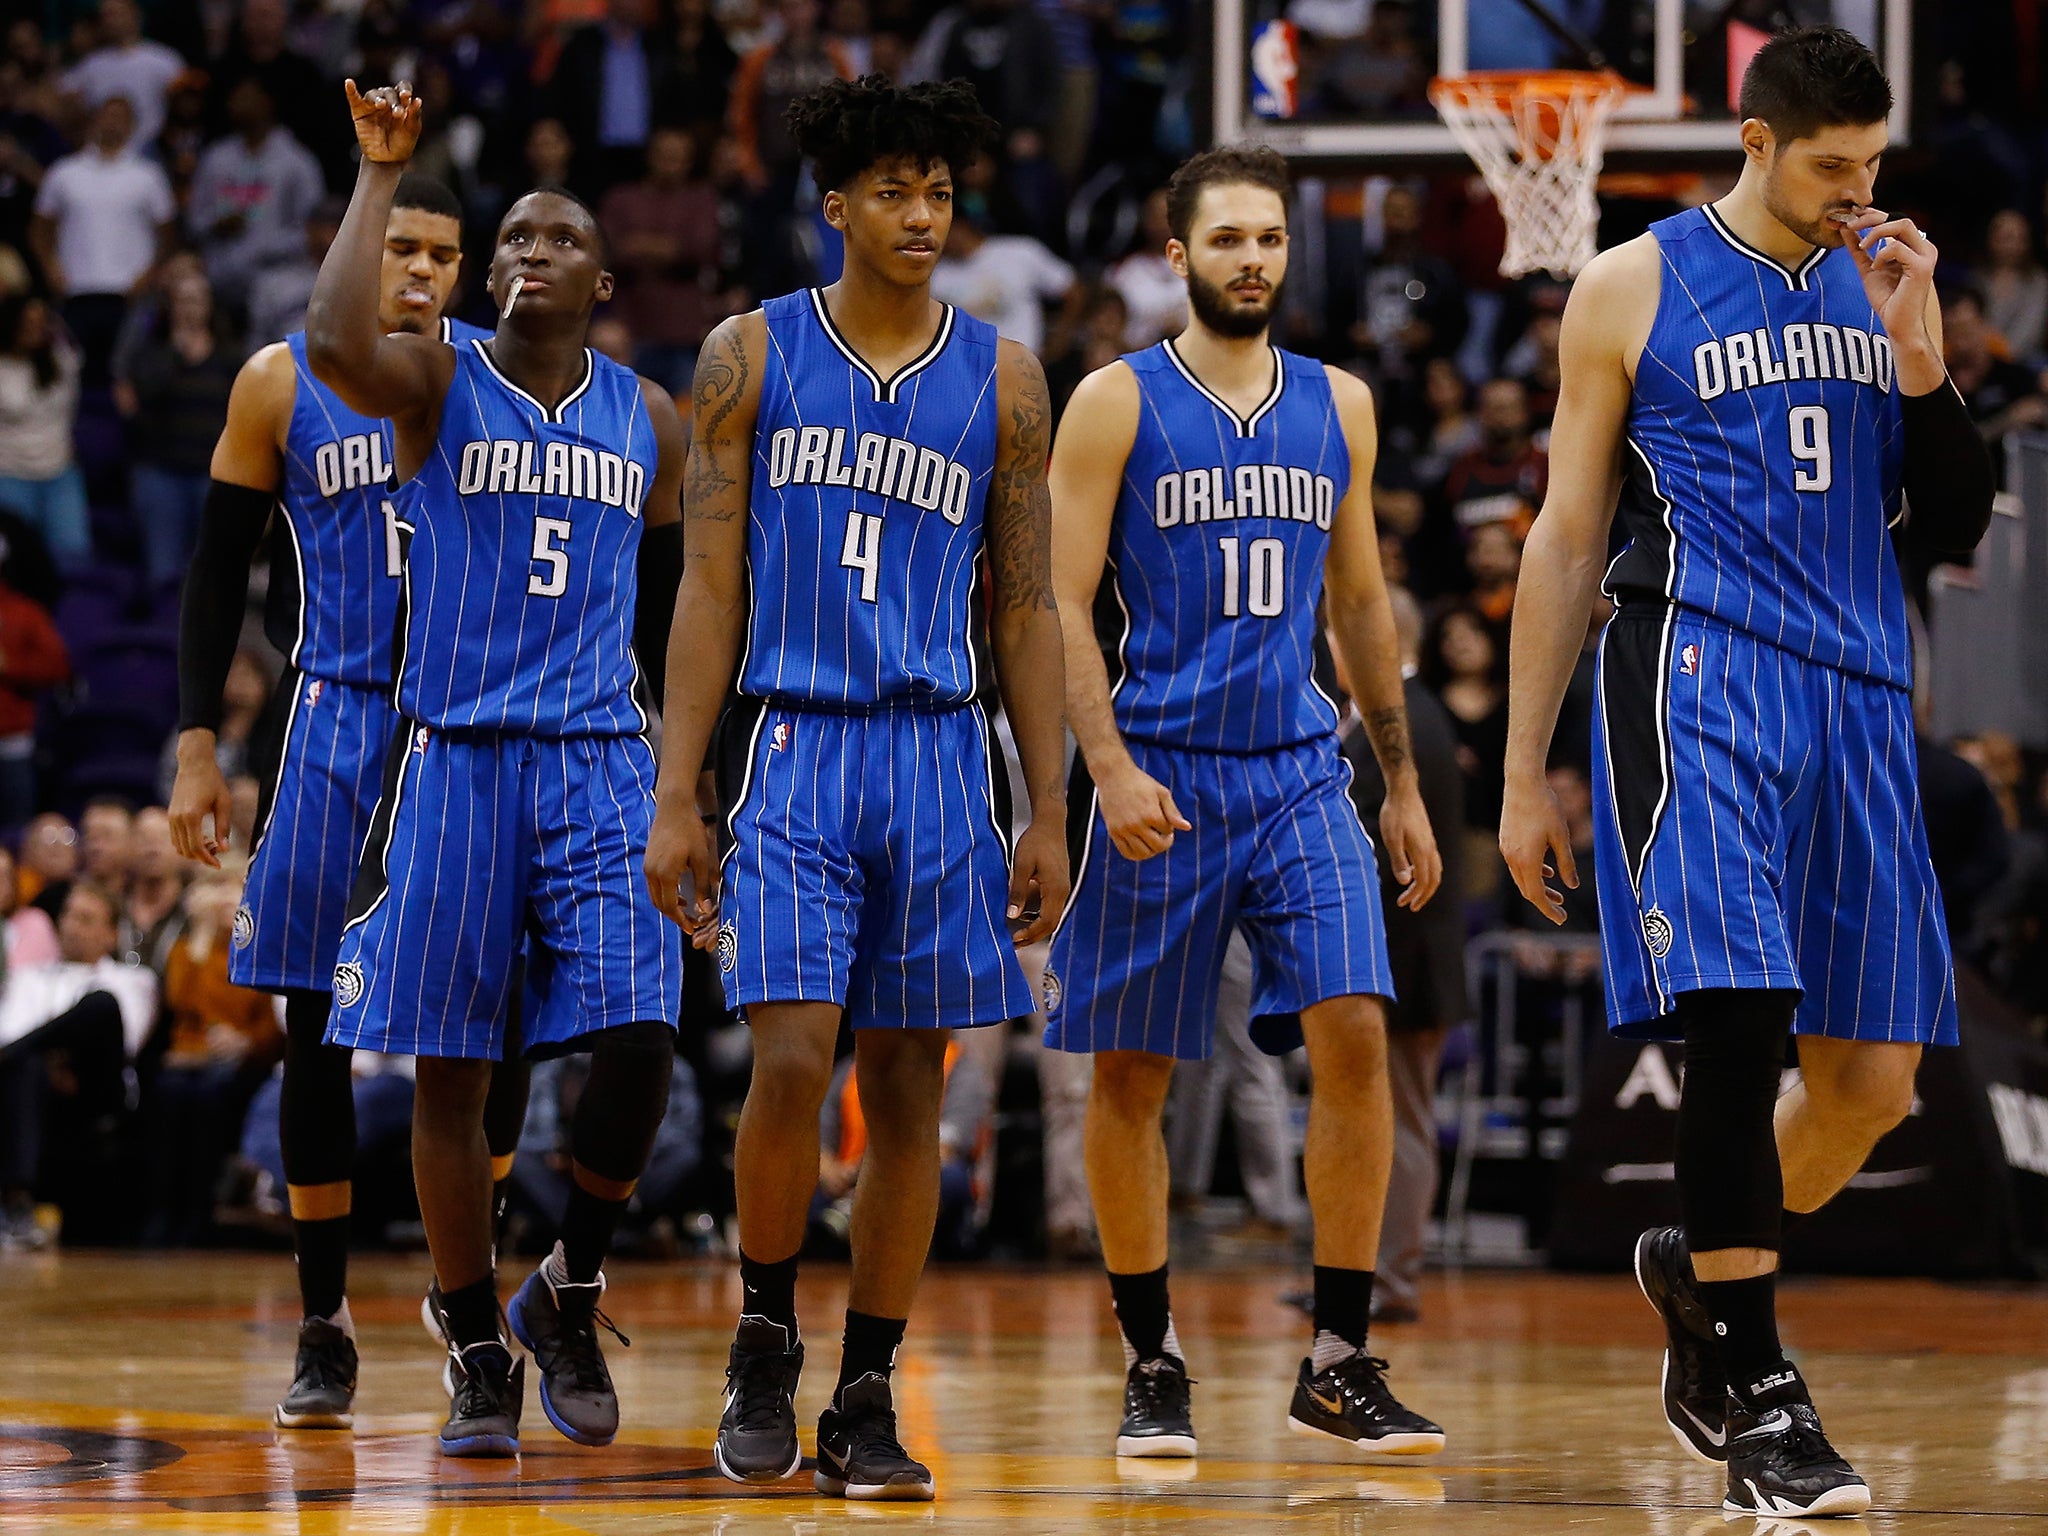 &#13;
The Magic are much improved this season&#13;